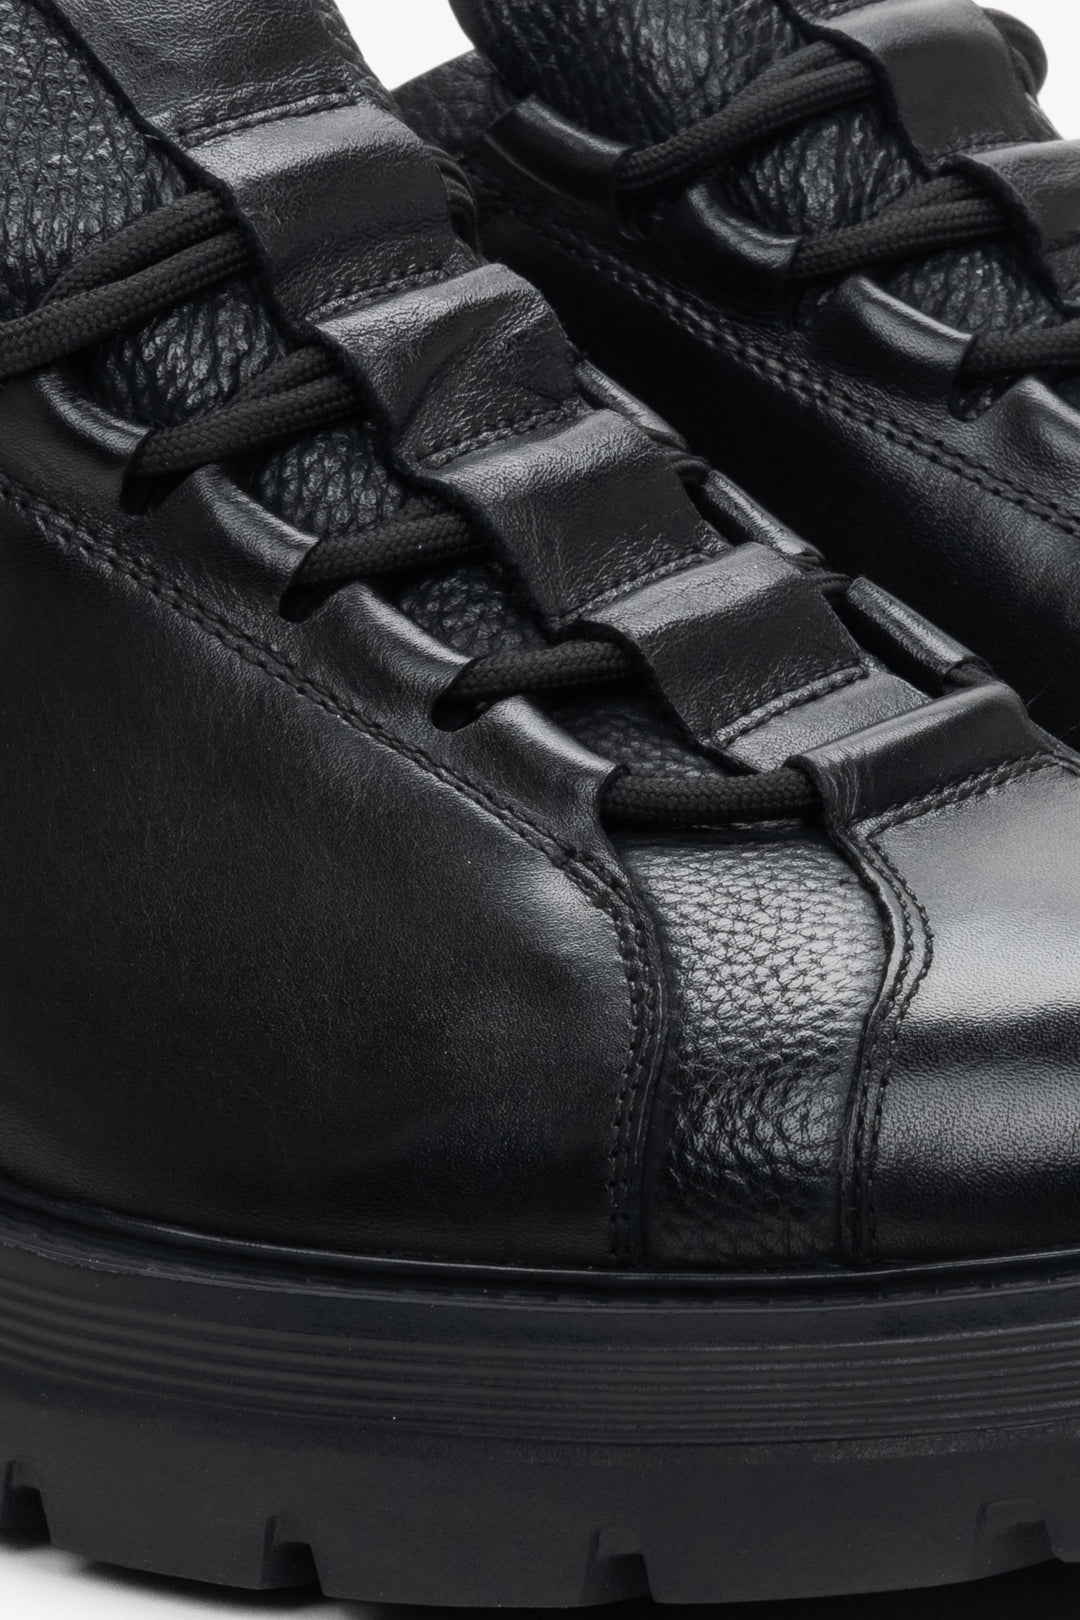 Men's black lace-up sneakers - close-up on details.